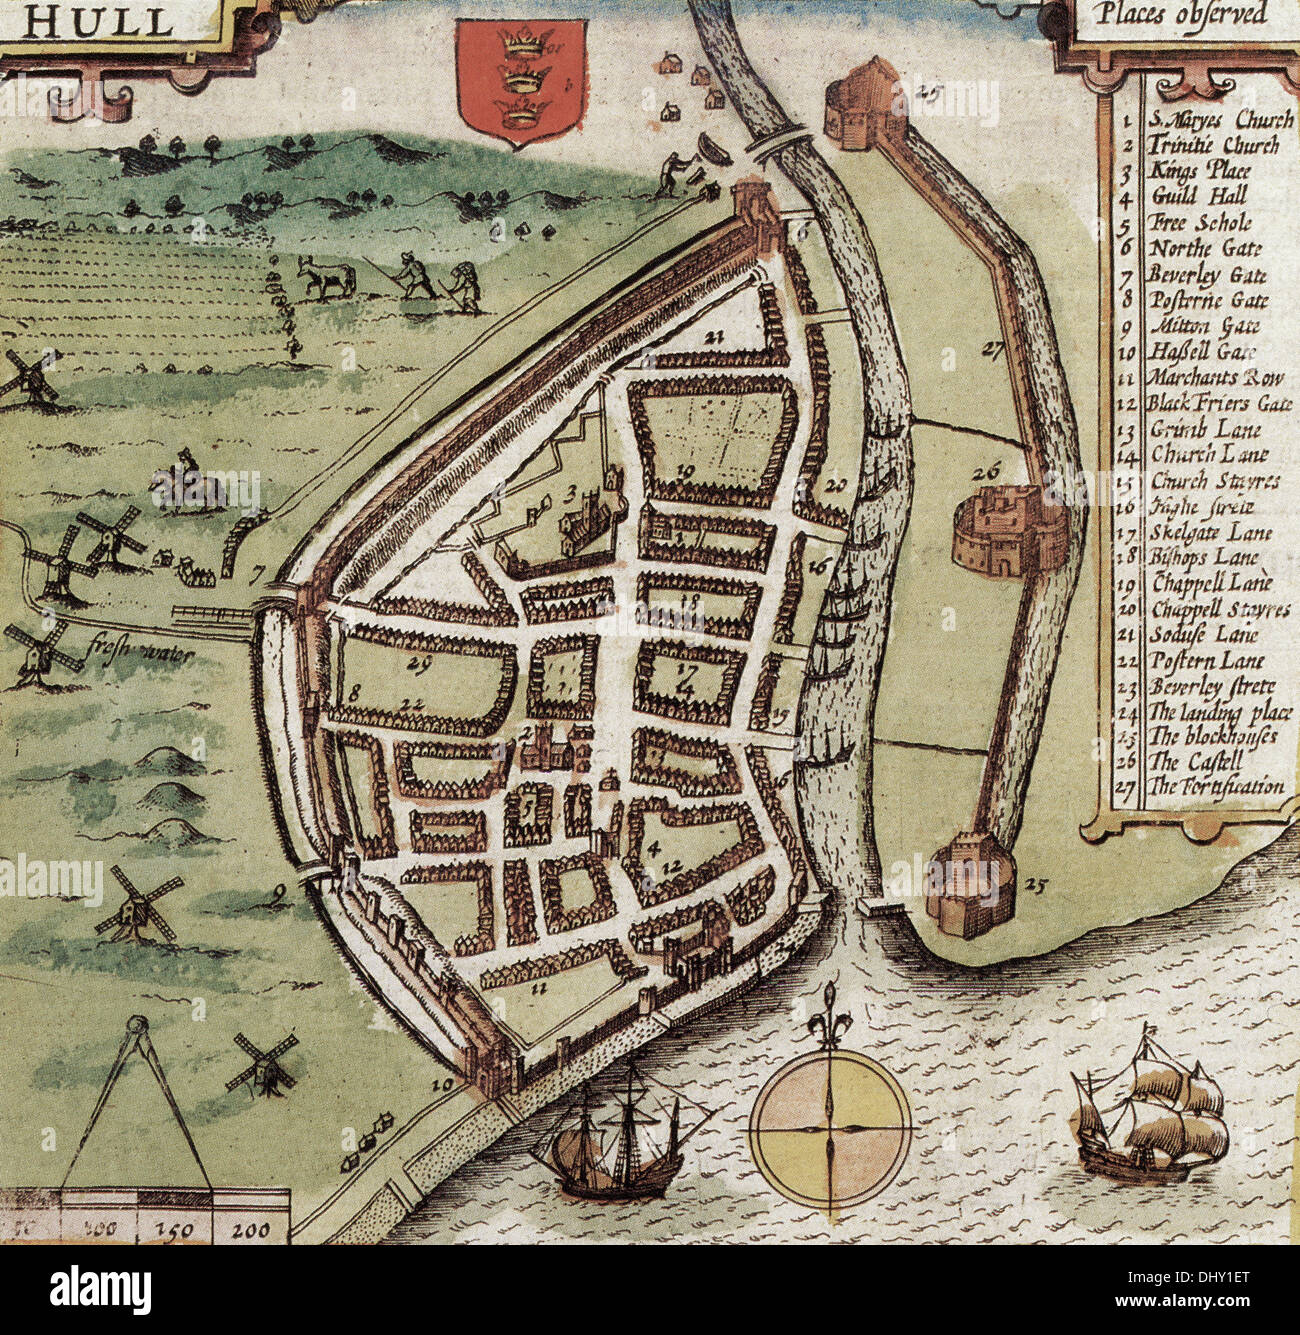 Old map of Hull, England, by John Speed, 1611 Stock Photo